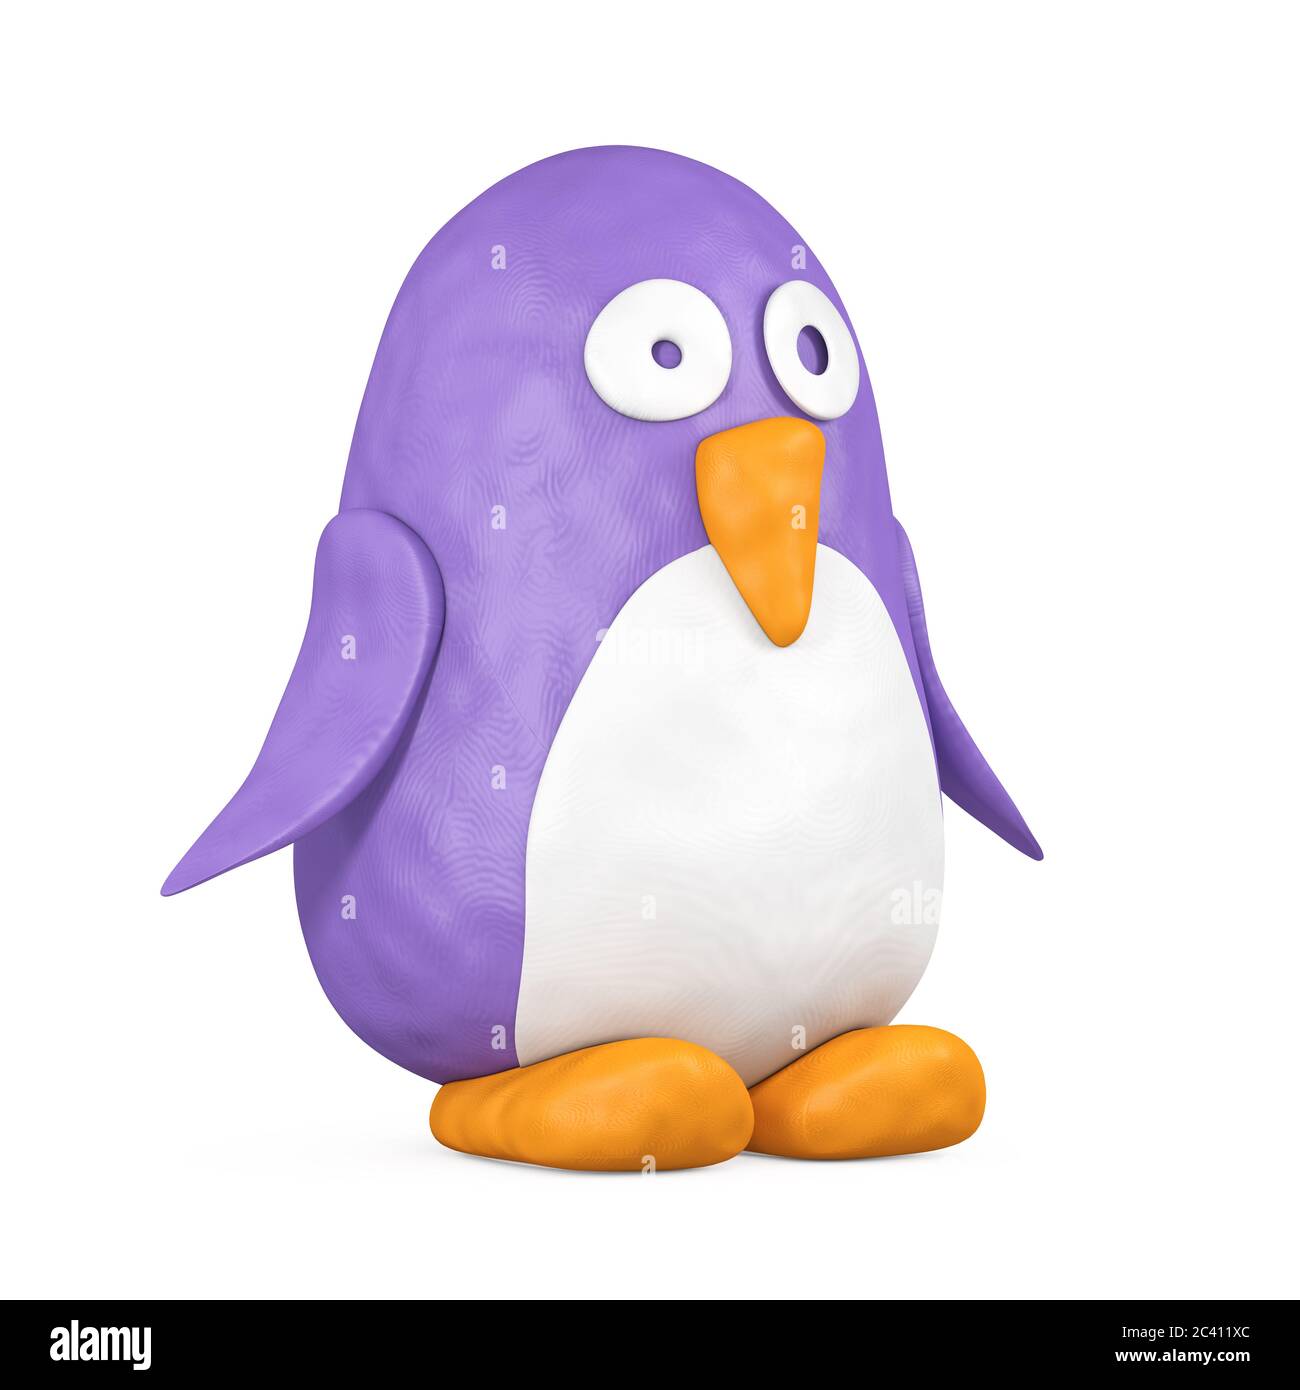 Cute Violet and White Toy Cartoon Plasticine or Clay Penguin on a white  background. 3d Rendering Stock Photo - Alamy